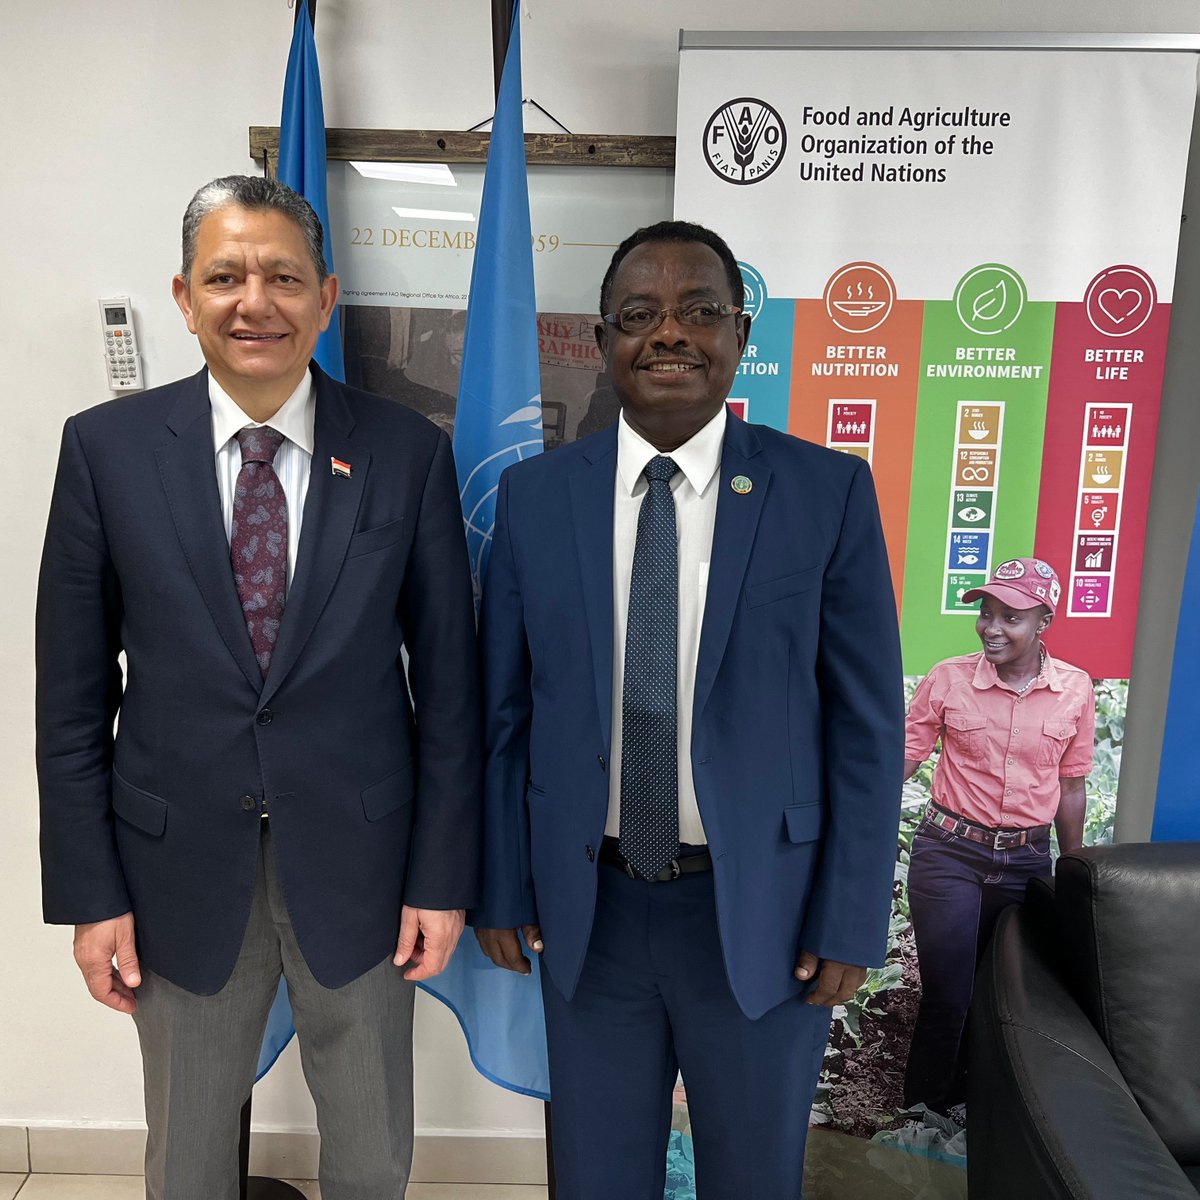 The @FAOAfricaADG Abebe Haile-Gabriel with Egypt's Ambassador to Ghana H.E. A. M. Youseef. The two discussed transferring ag knowledge from Egypt to other African countries under a South-South agreement with FAO & the Egyptian Agency of Partnership for Development (EAPD).